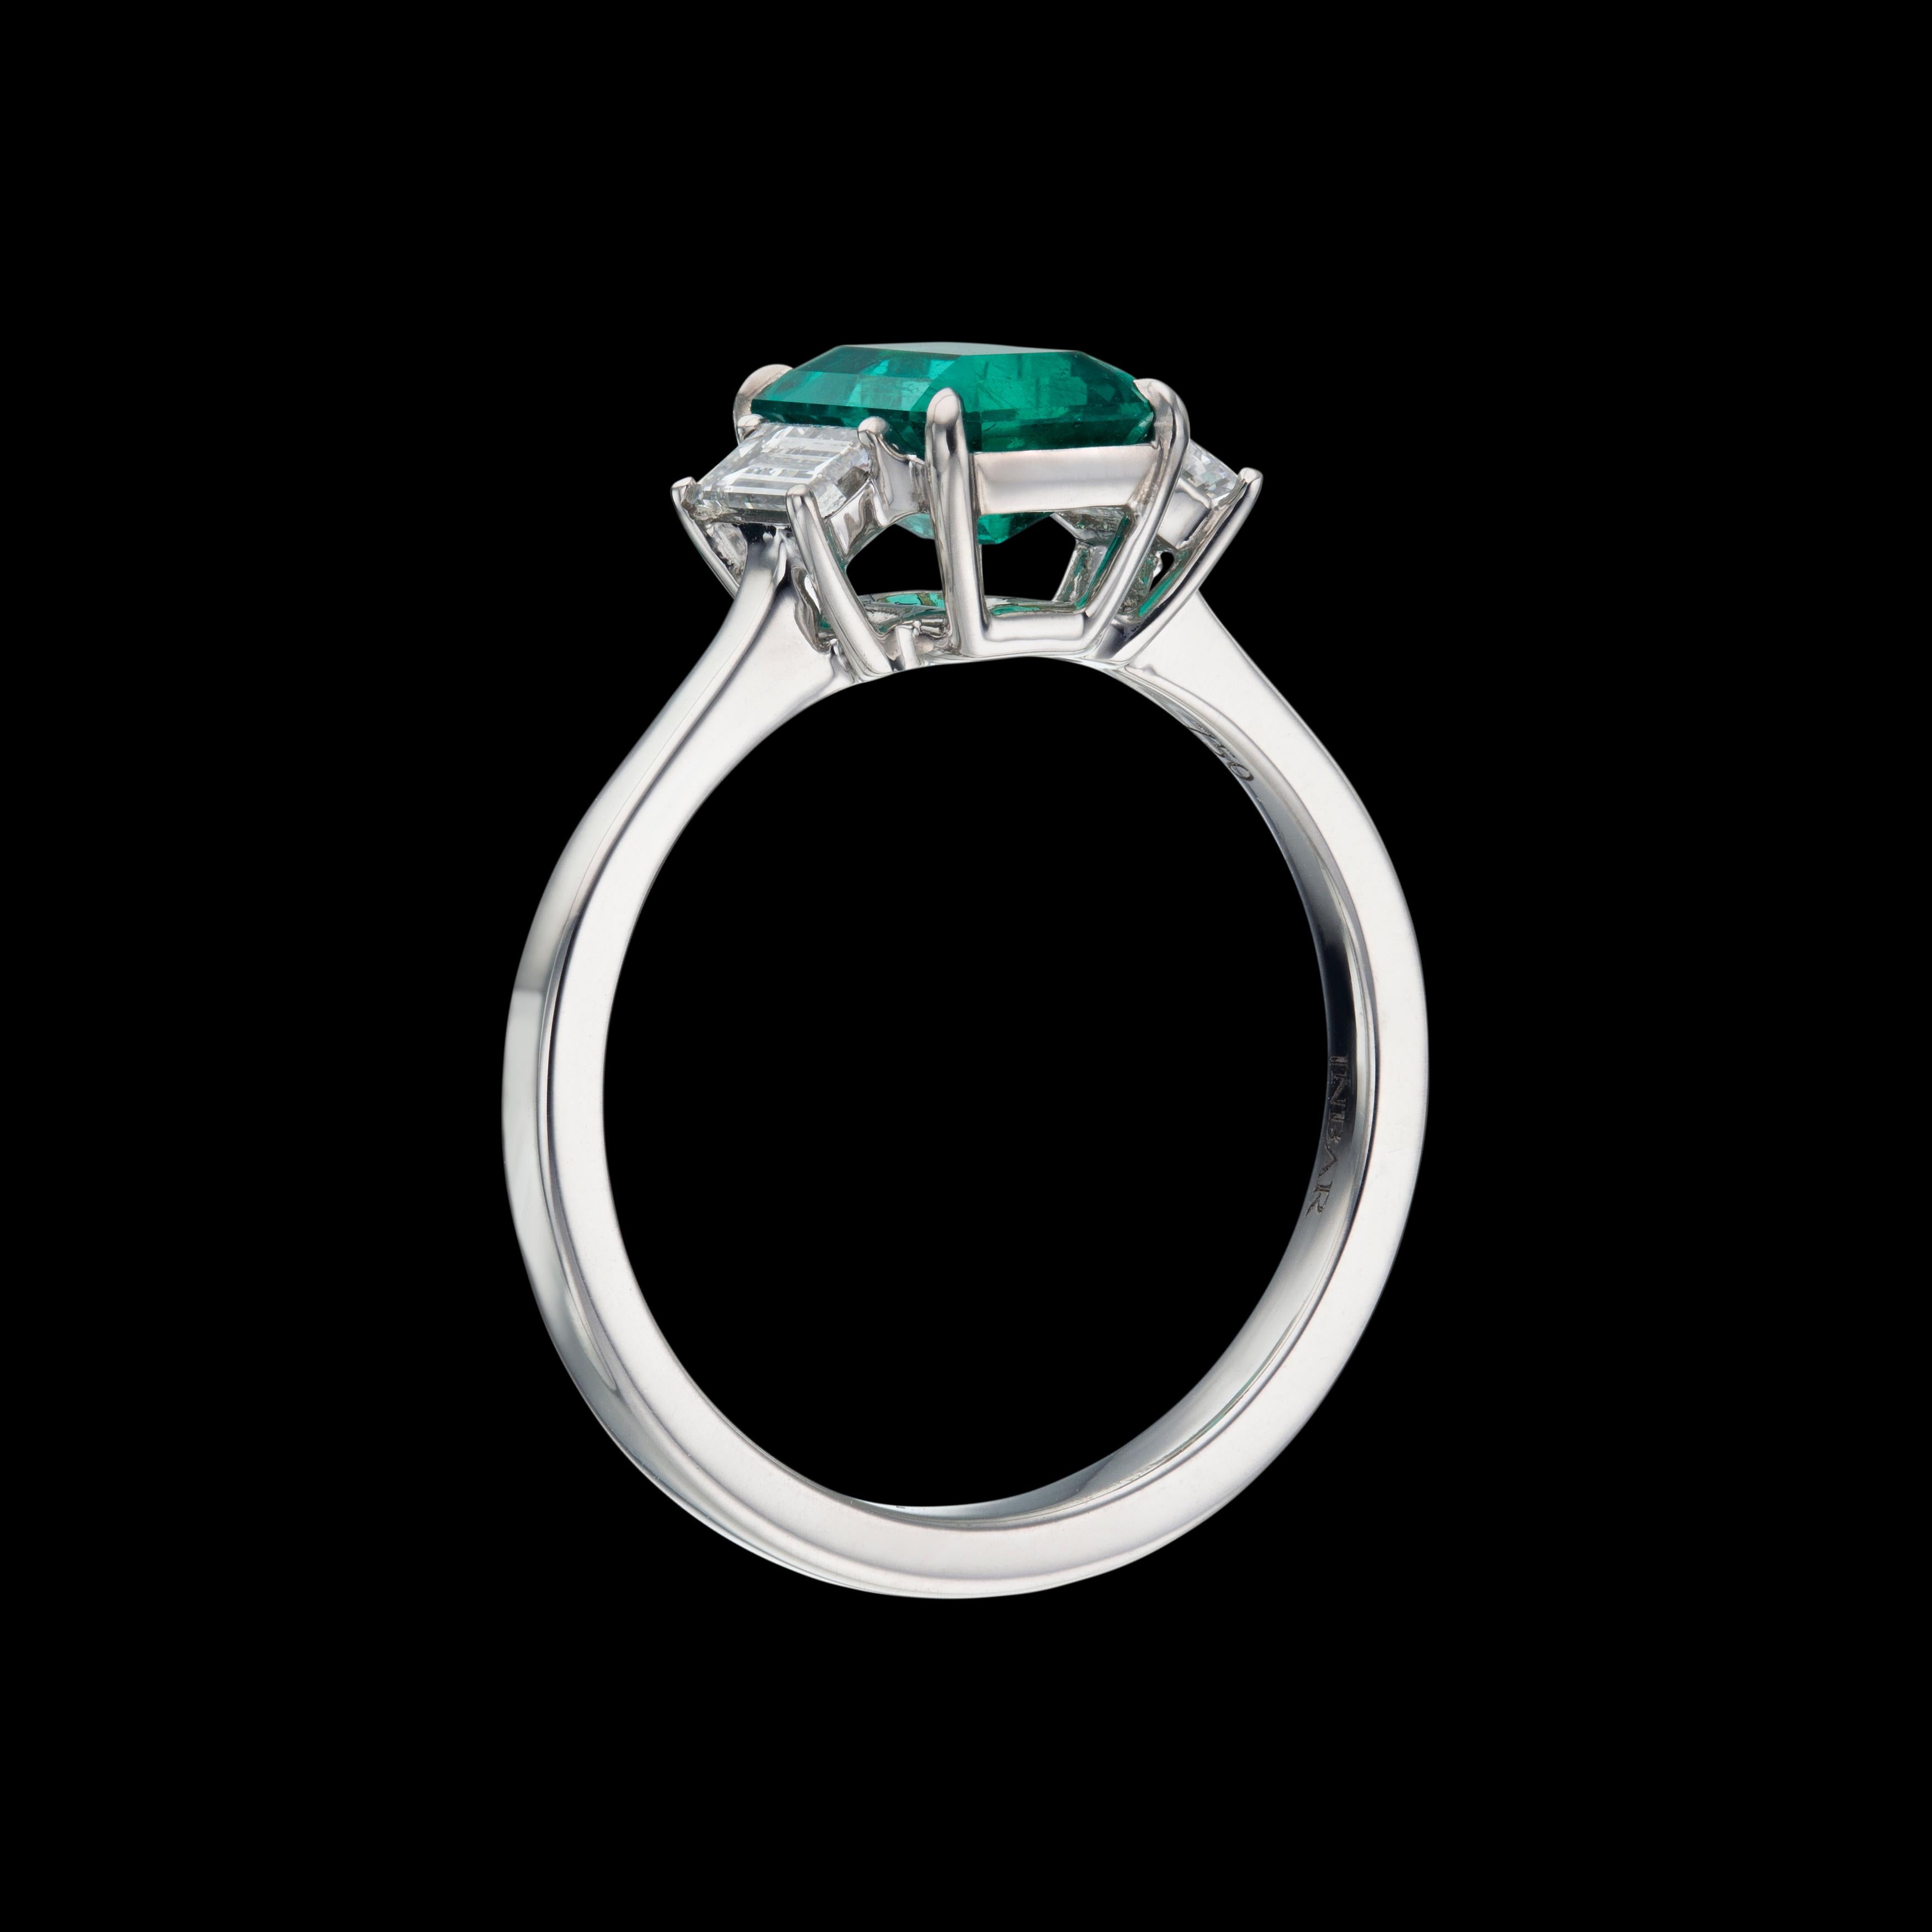 Very high quality Afghan center emerald and 2 emerald cut diamond ring